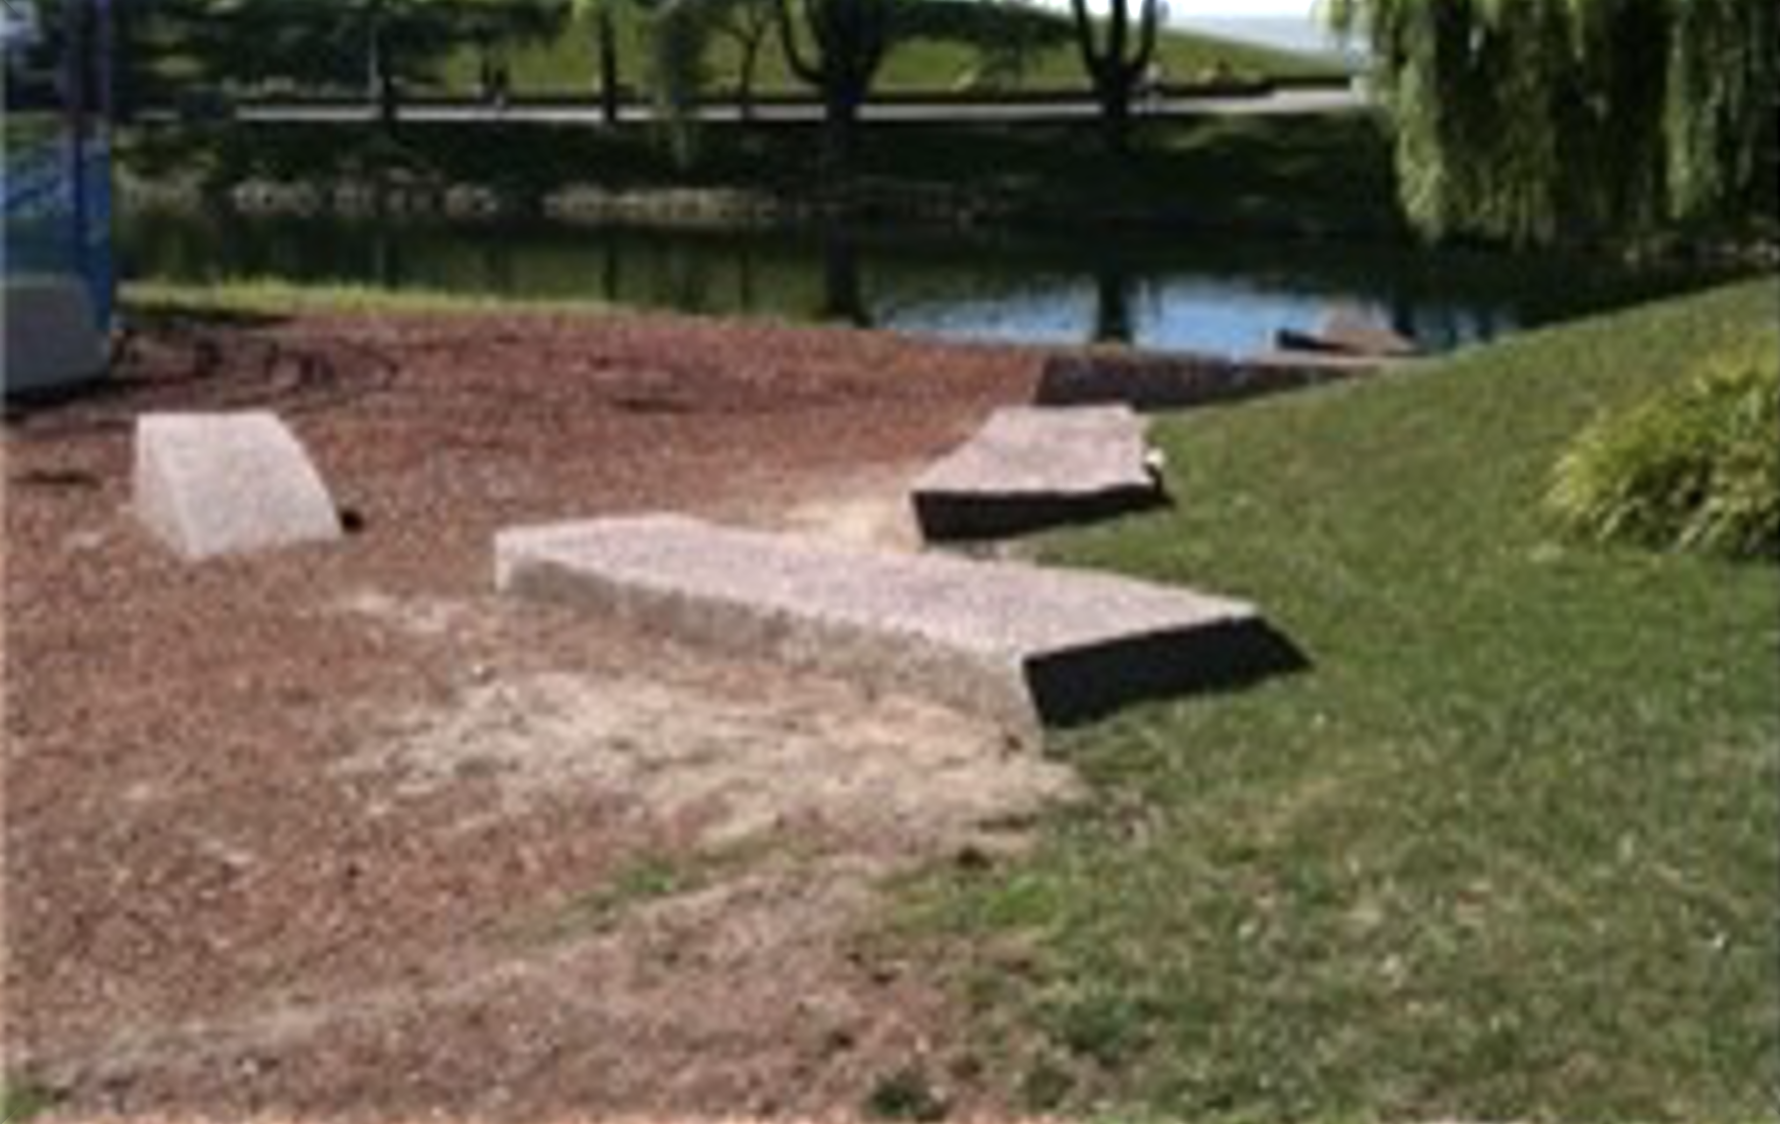 Image of three slabs of stones varying in size on a grassy area next to an inlet of water 